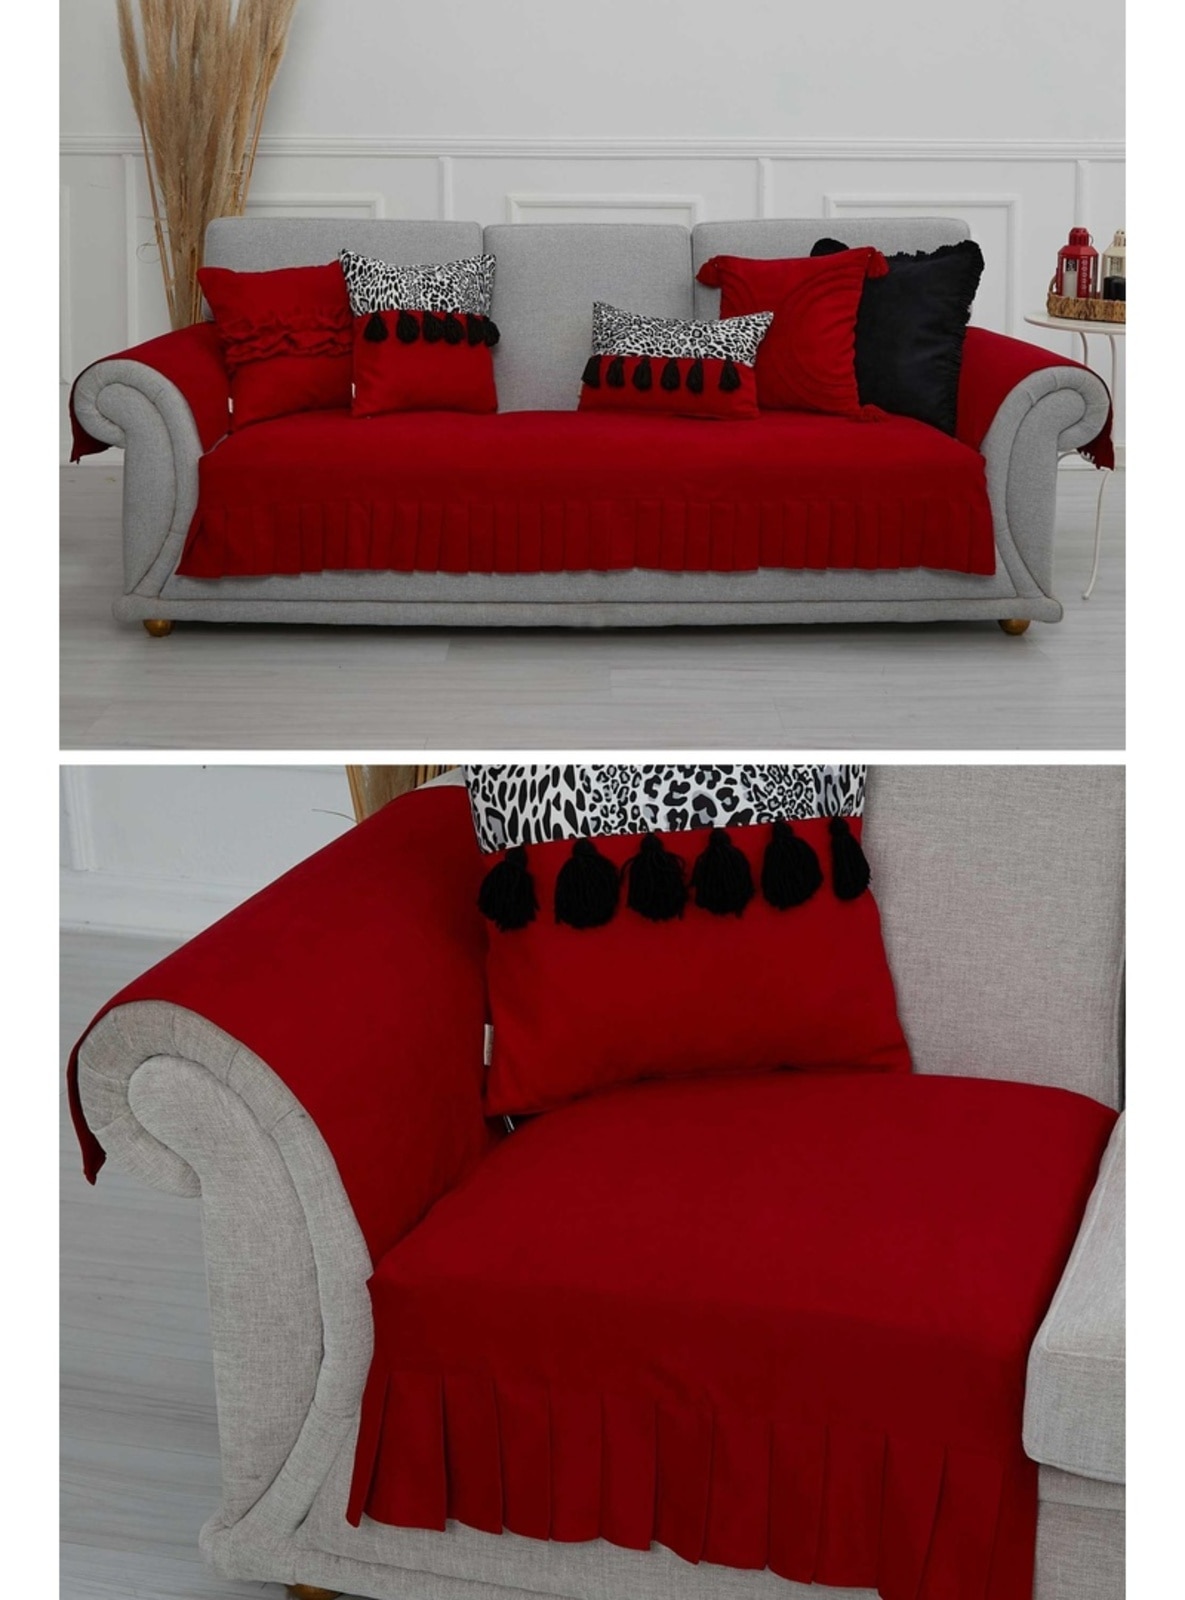 Red Sofa Throws